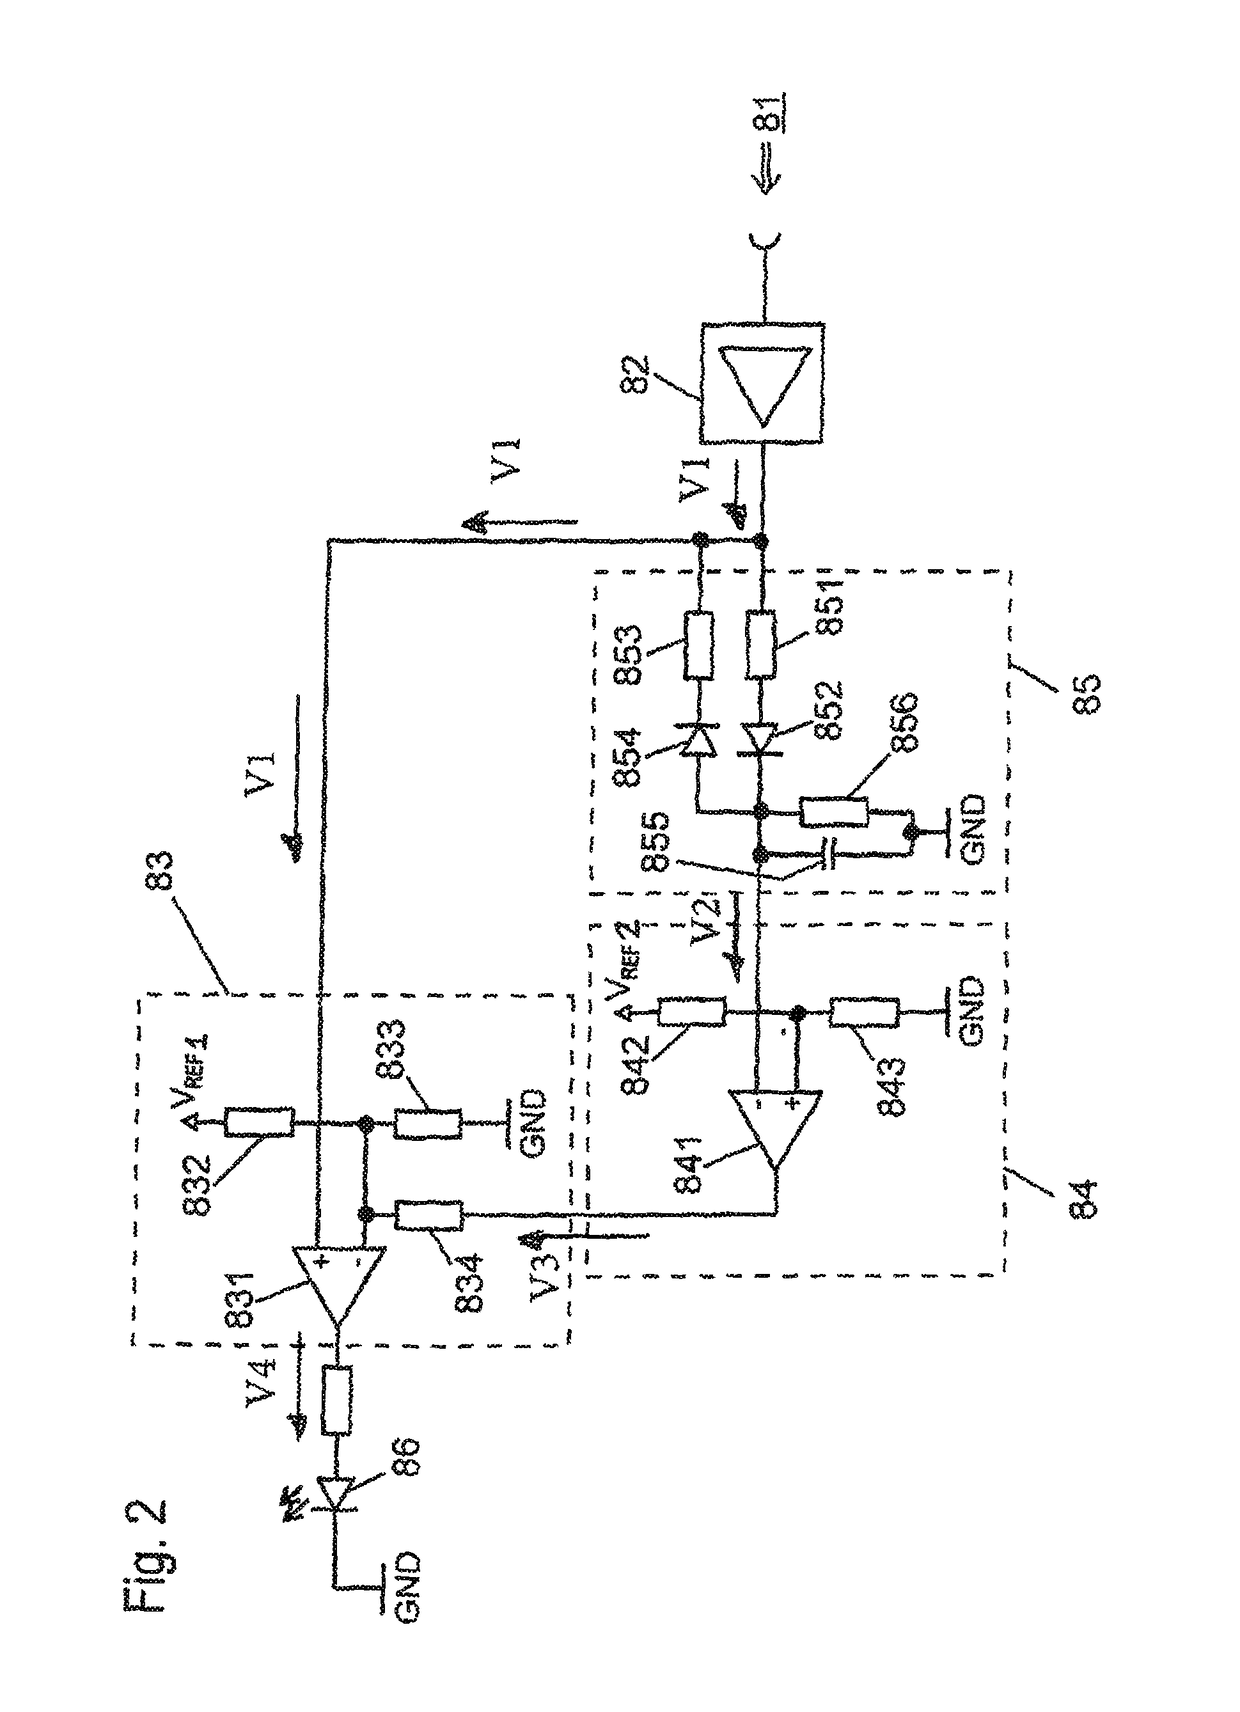 Power supply device and method for limiting an output current of a power supply device